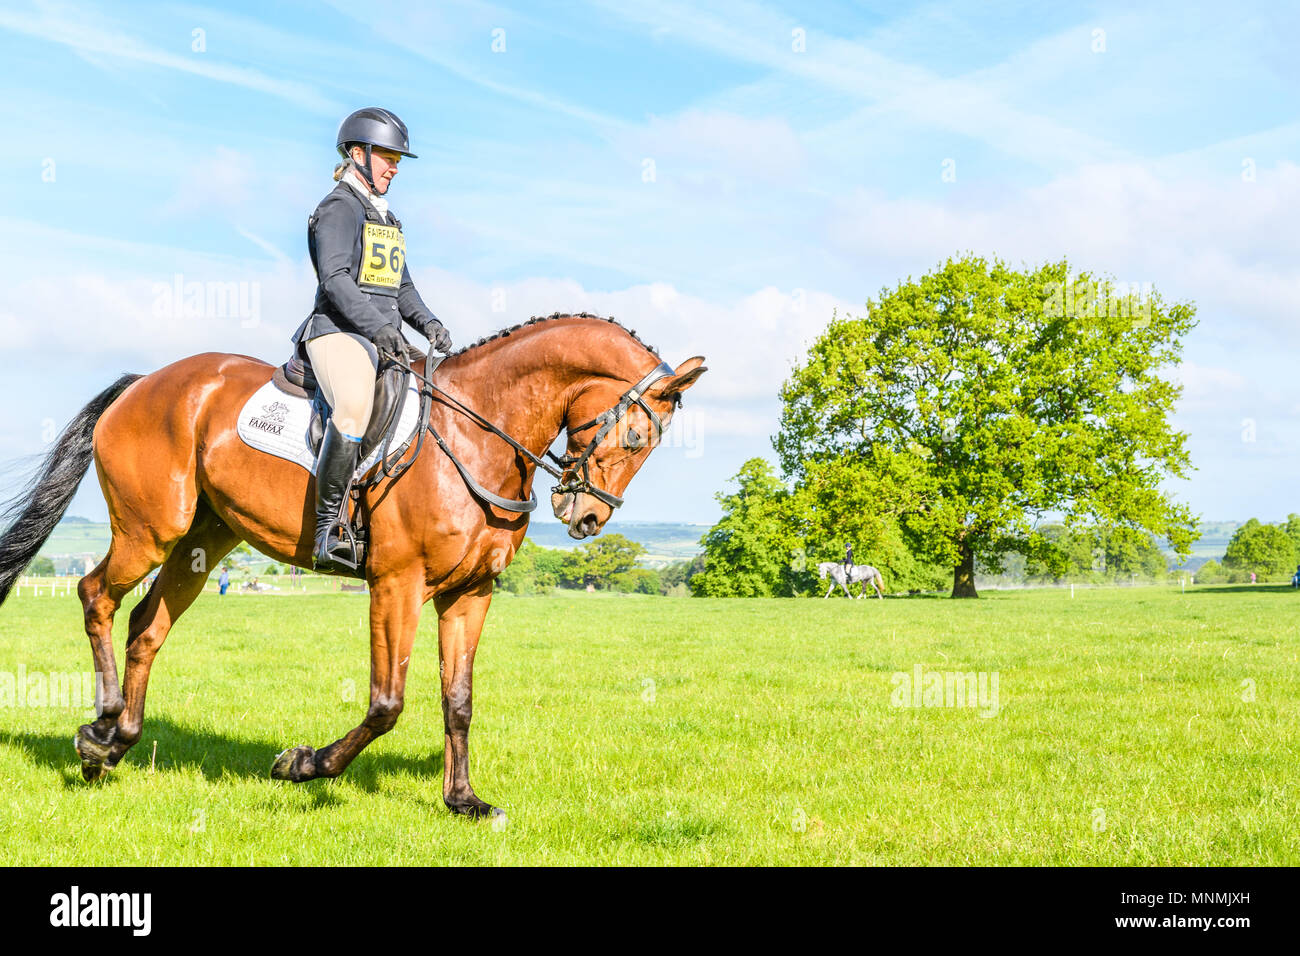 Corby, England. 18th May 2018. The horse Billy Libretti and rider Emily Chandler take part in the dressage event during the international horse trials at the park of Rockingham Castle, Corby, England on 18 May 2018. Credit: Michael Foley/Alamy Live News Stock Photo